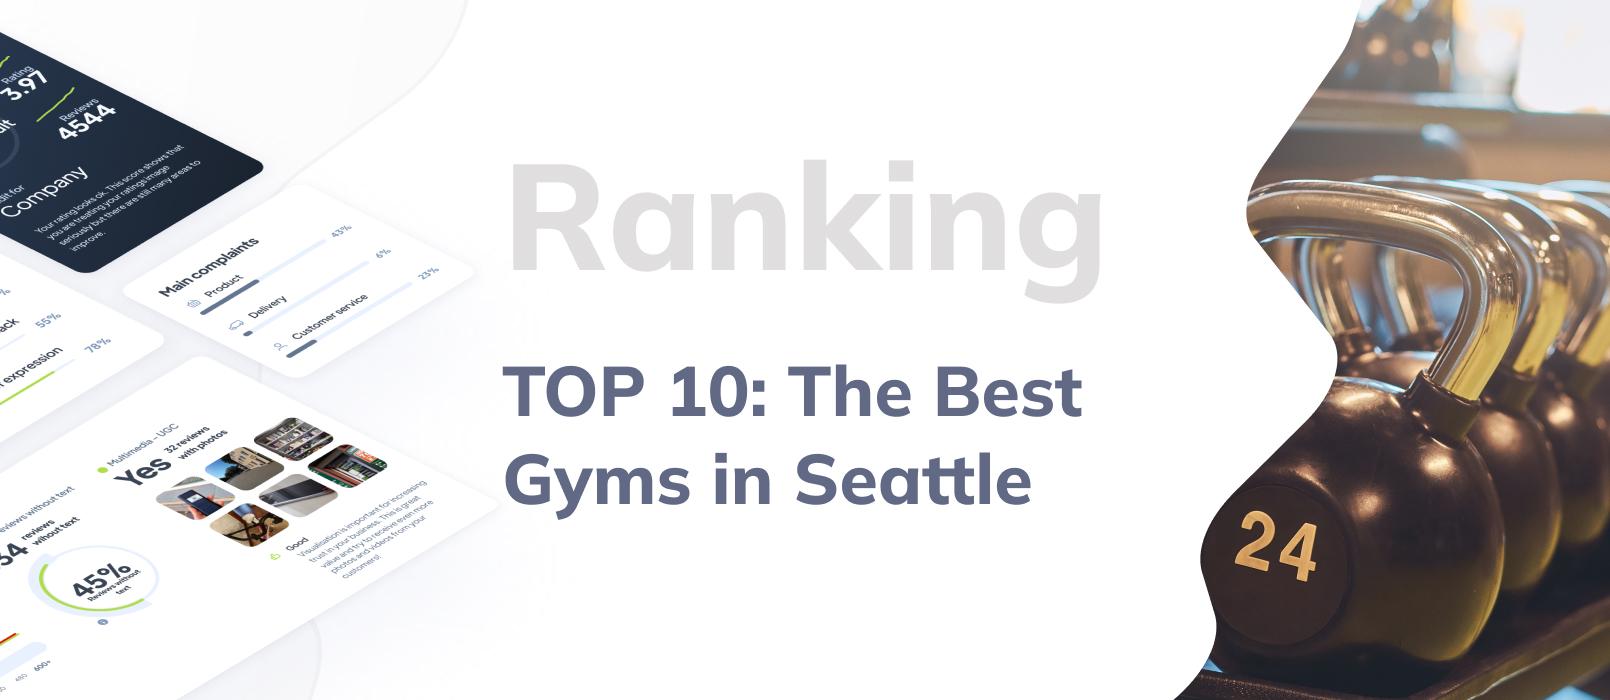 TOP 10: Best Gyms in Seattle - Customer Reviews Based Ranking